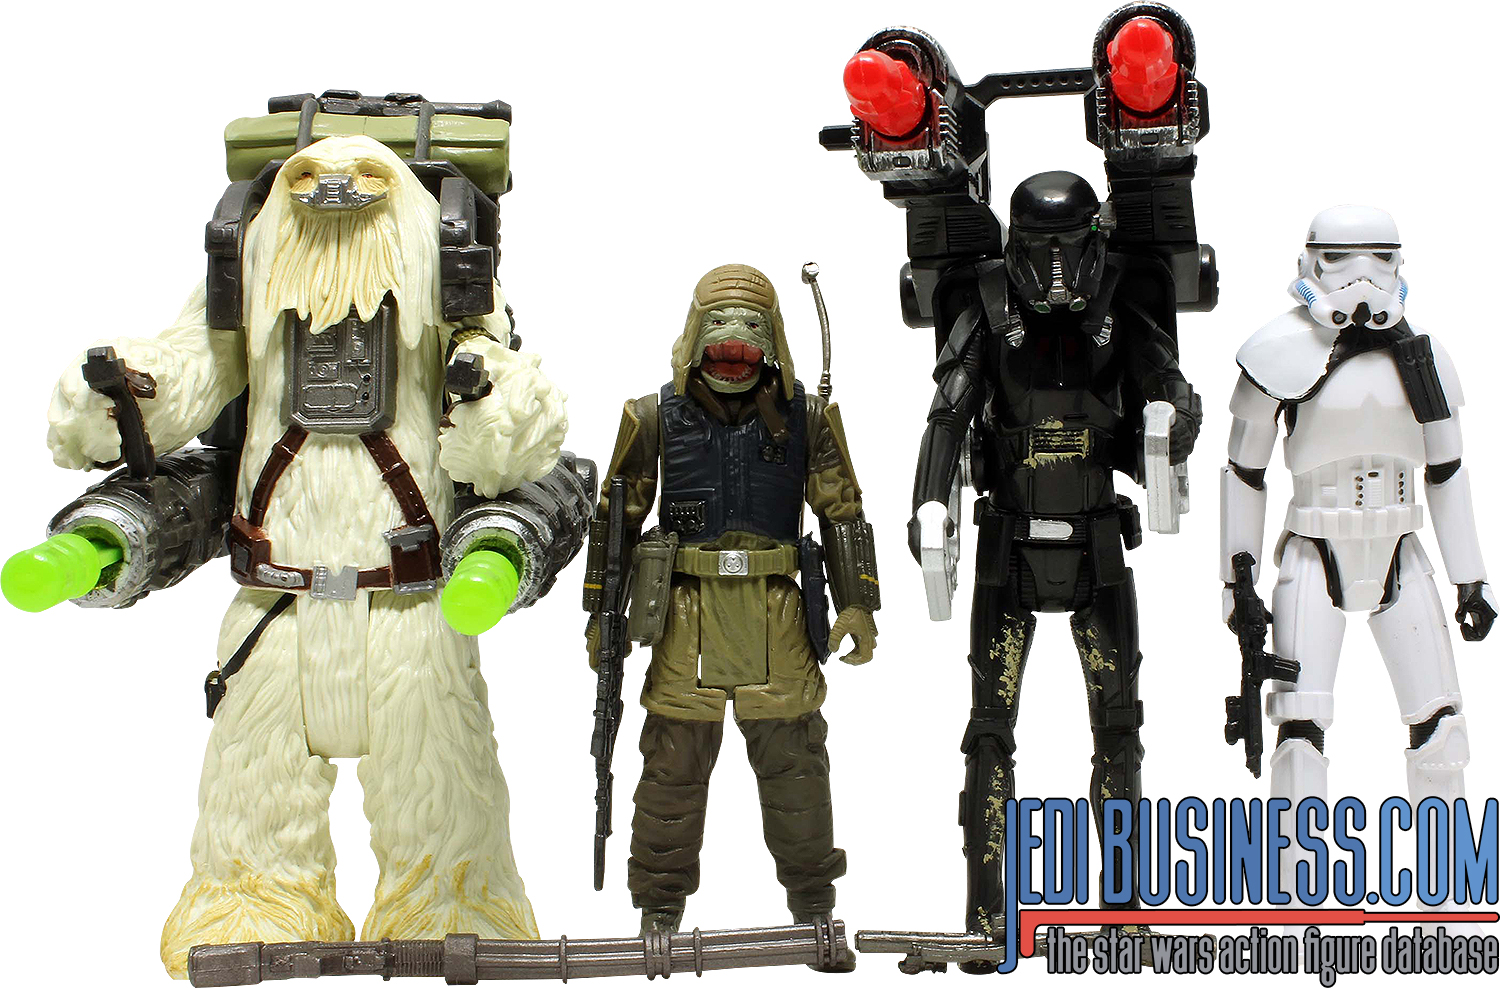 Moroff Kohl's Rogue One 4-Pack